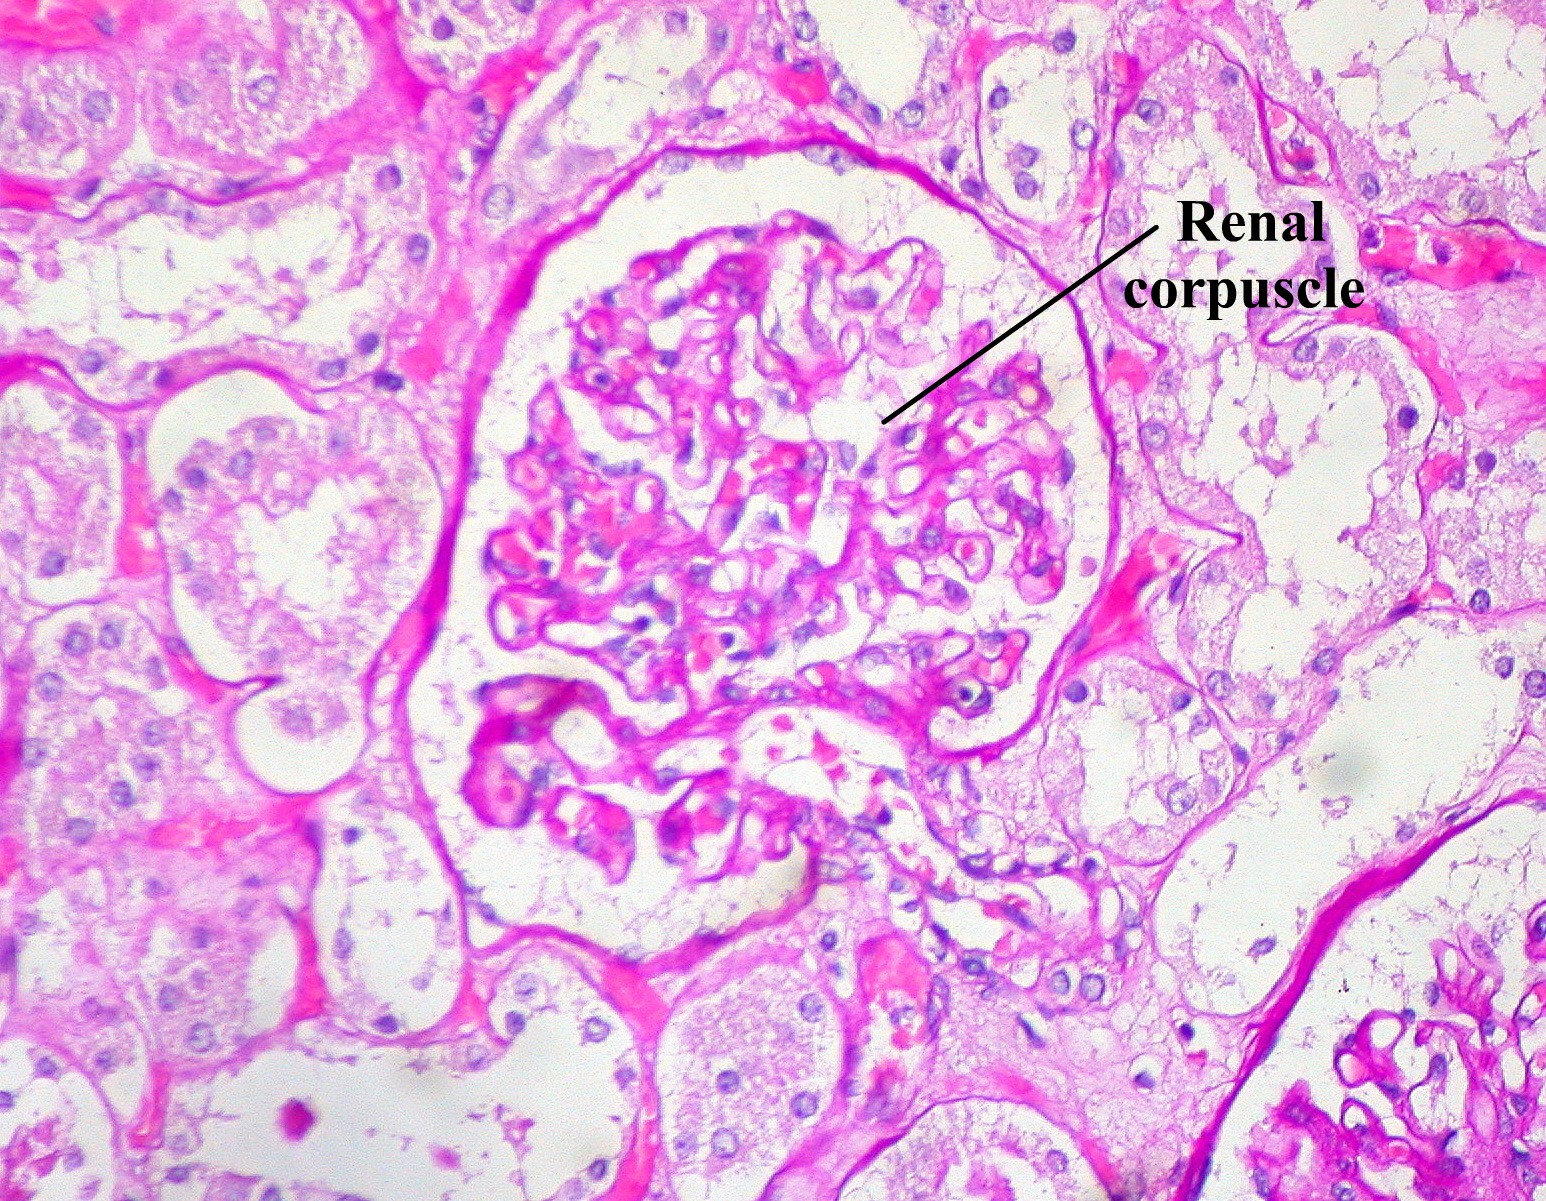 Structure - Renal corpuscle